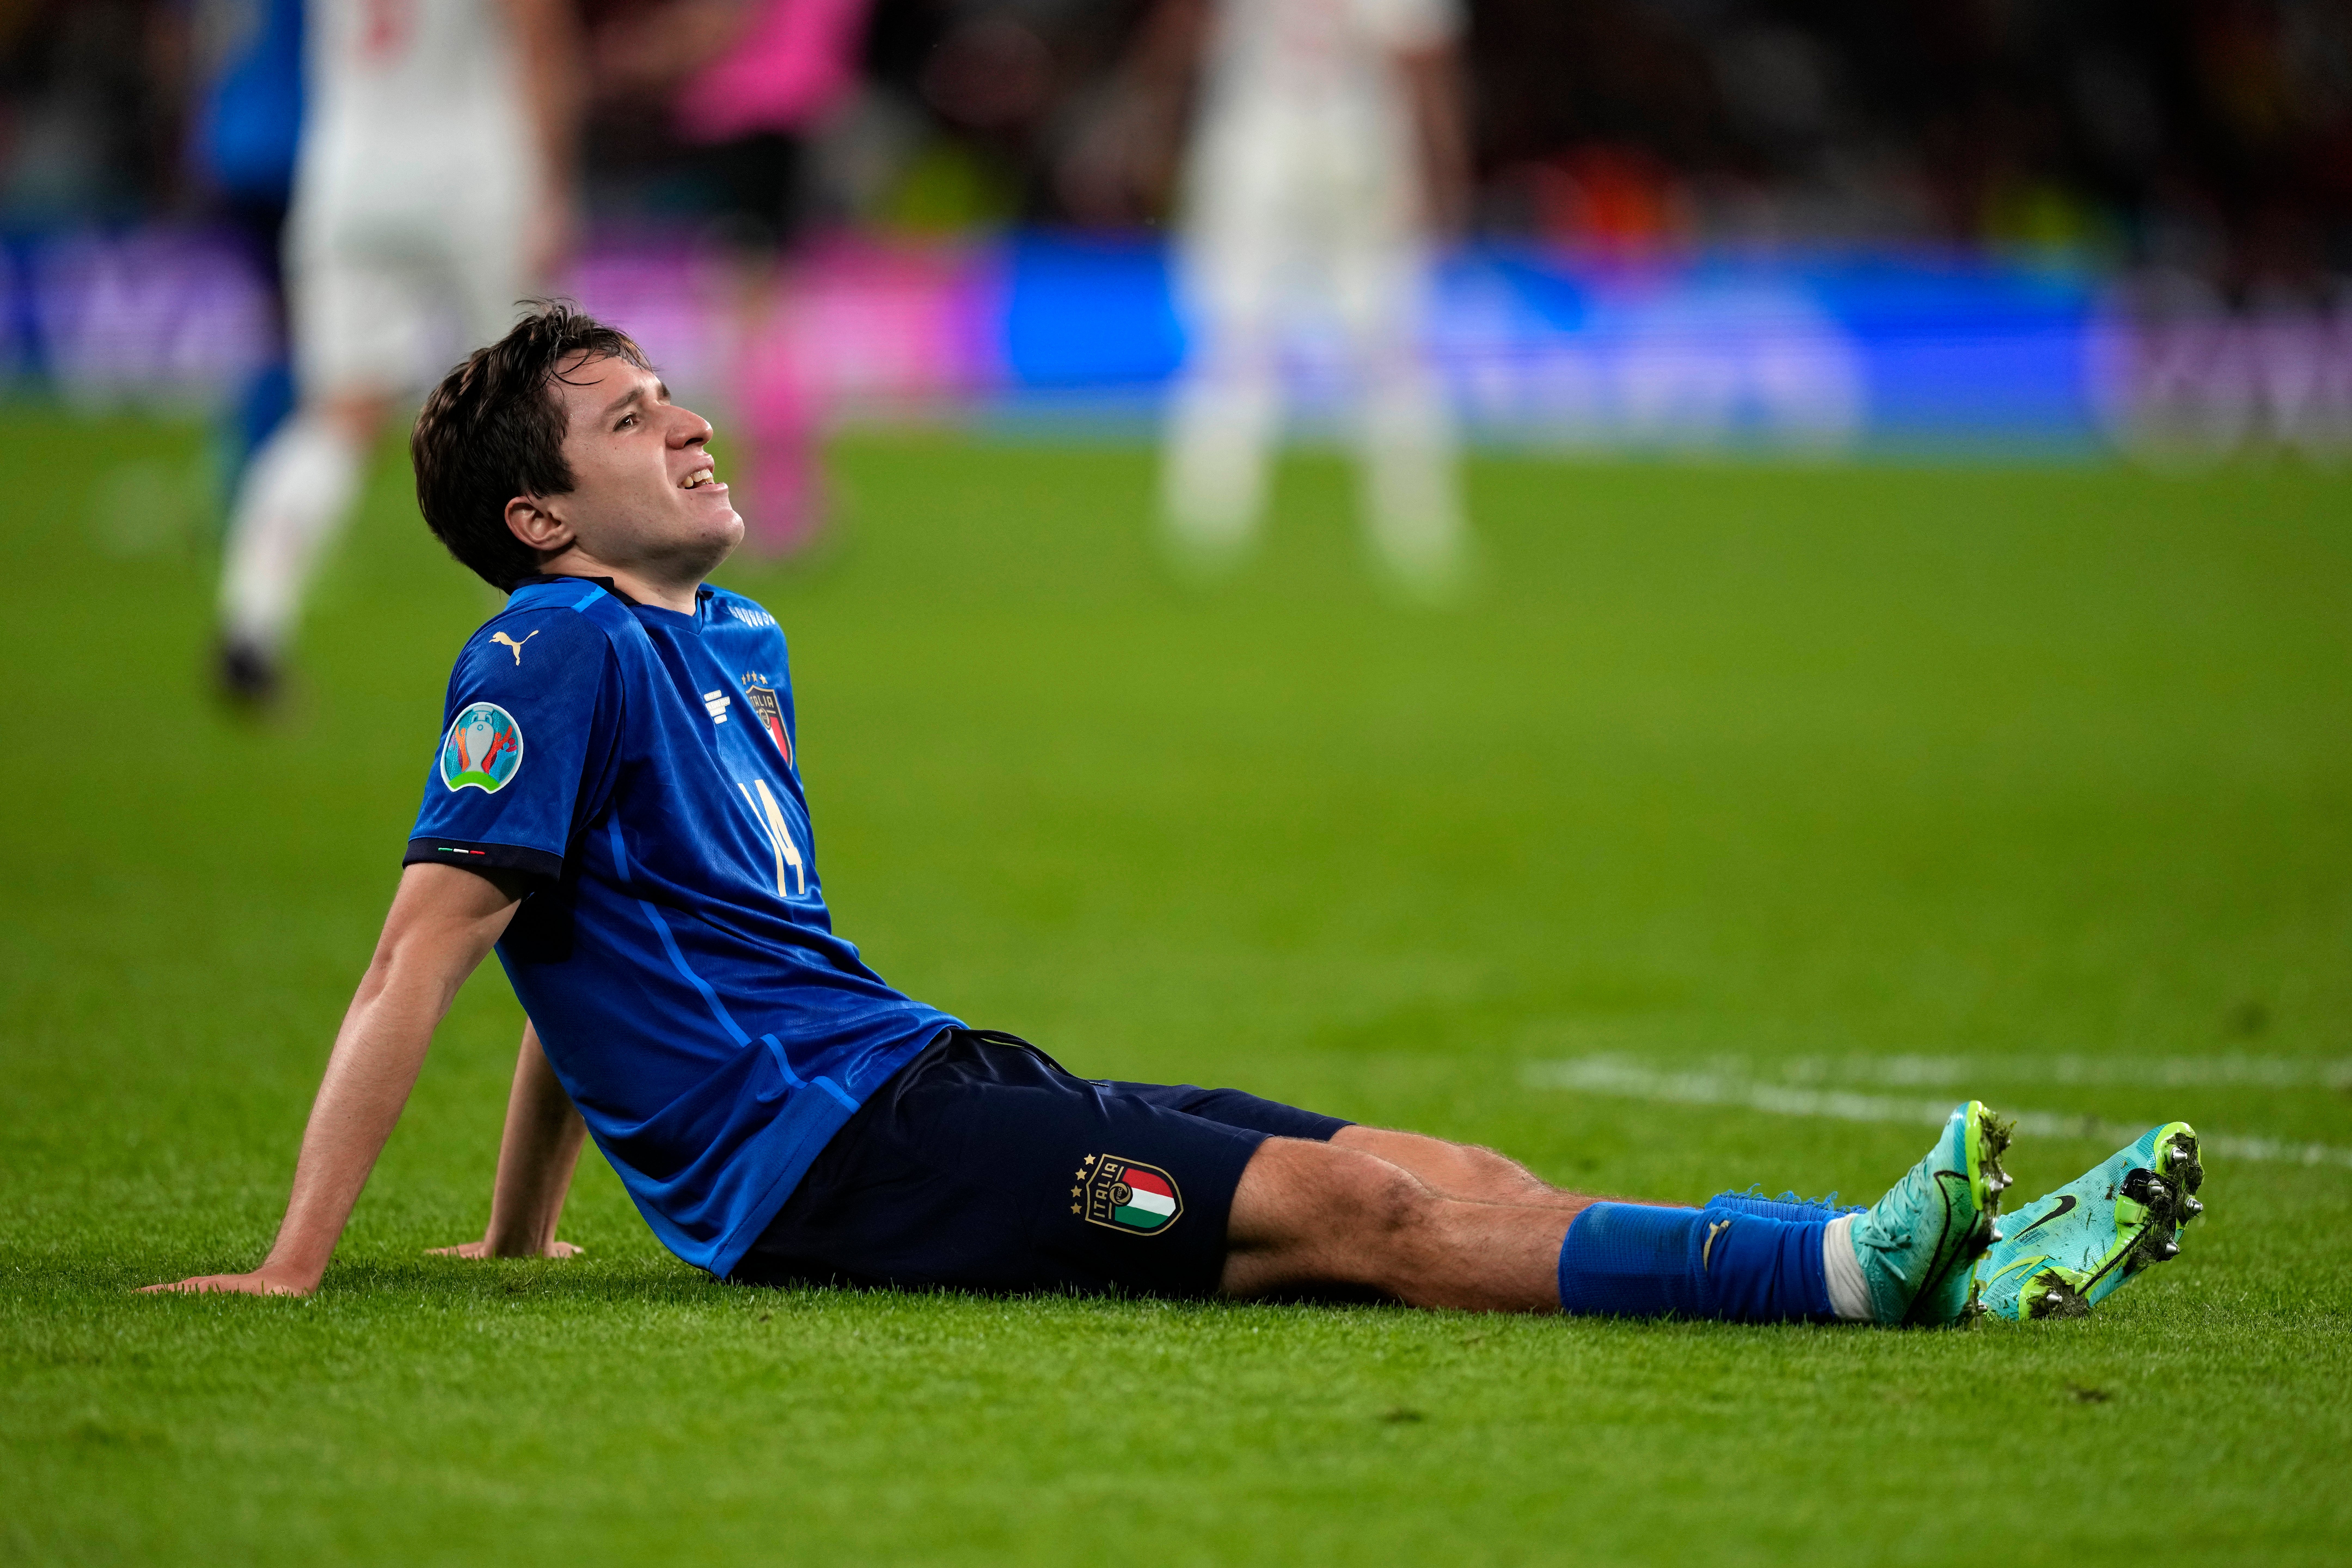 Italy's Federico Chiesa sits down on the pitch during the semi-final against Spain